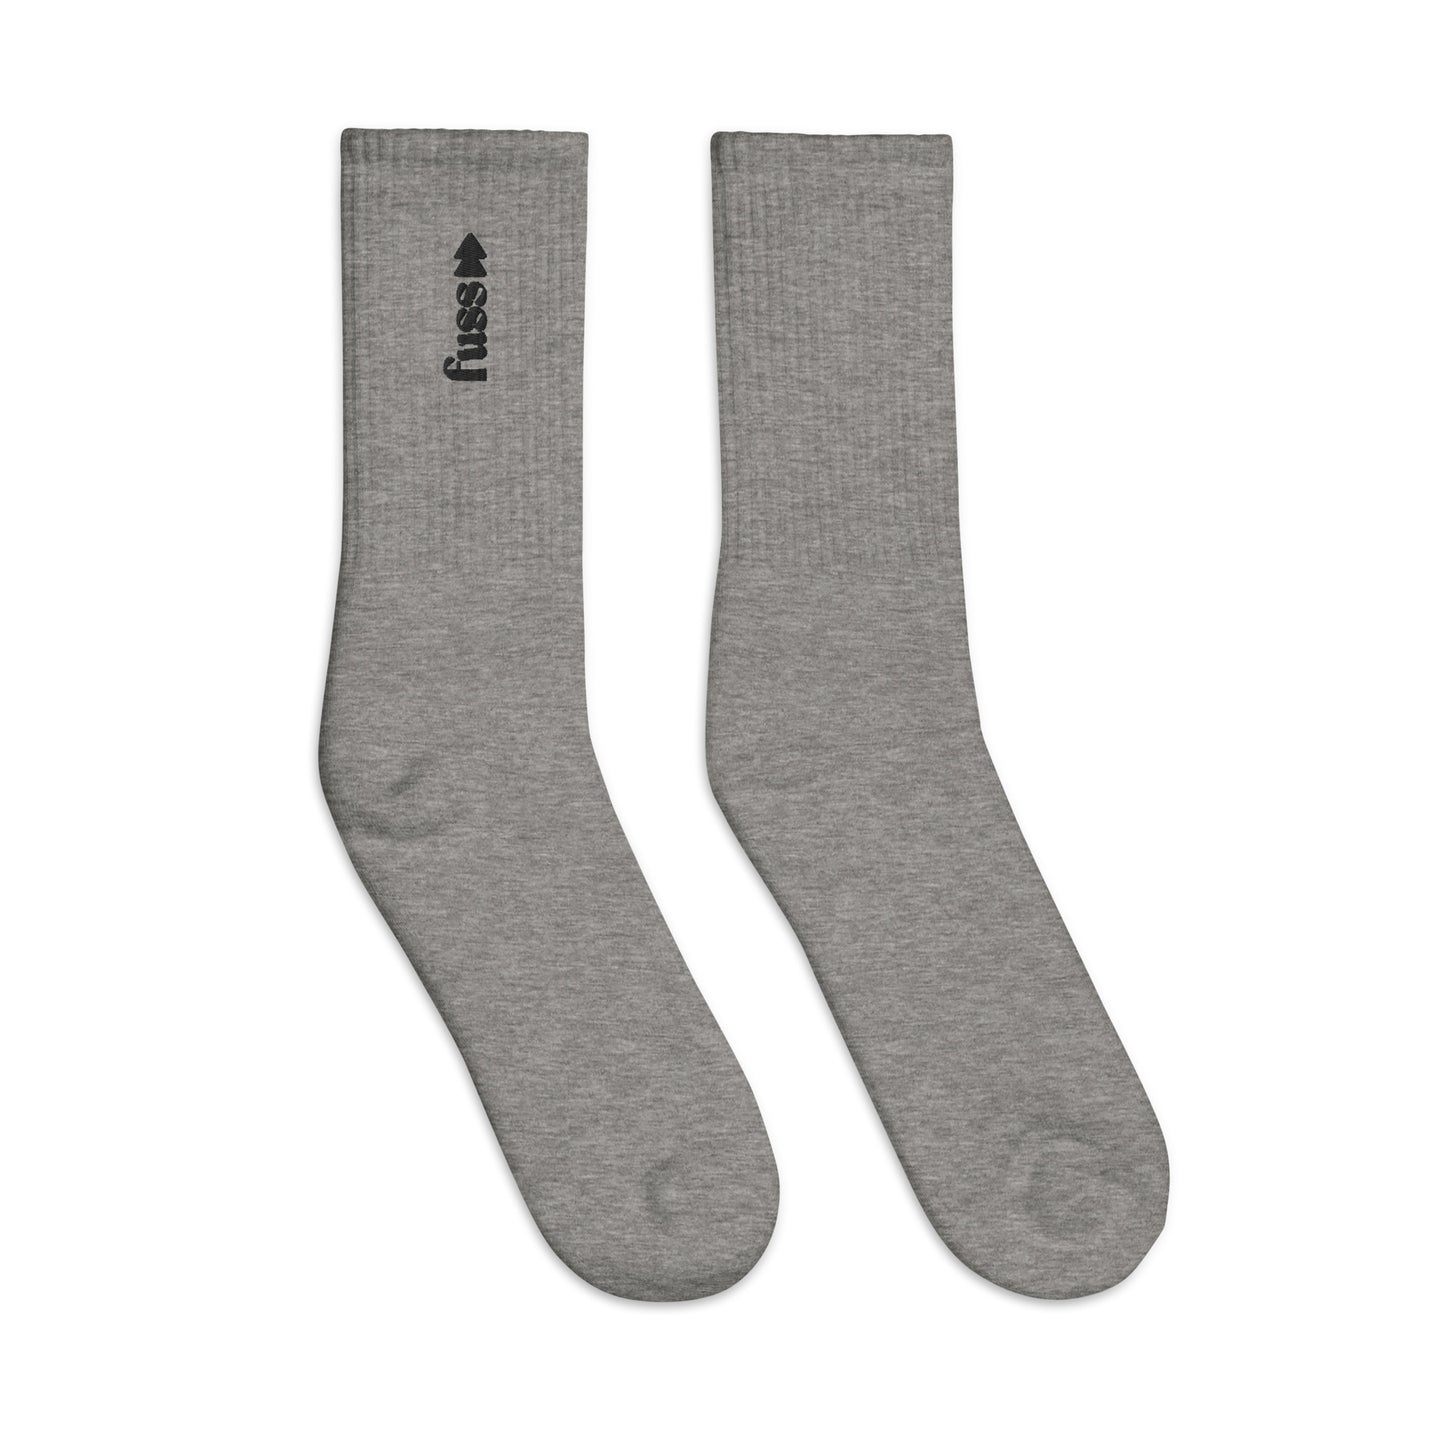 Embroidered Socks in Fuss